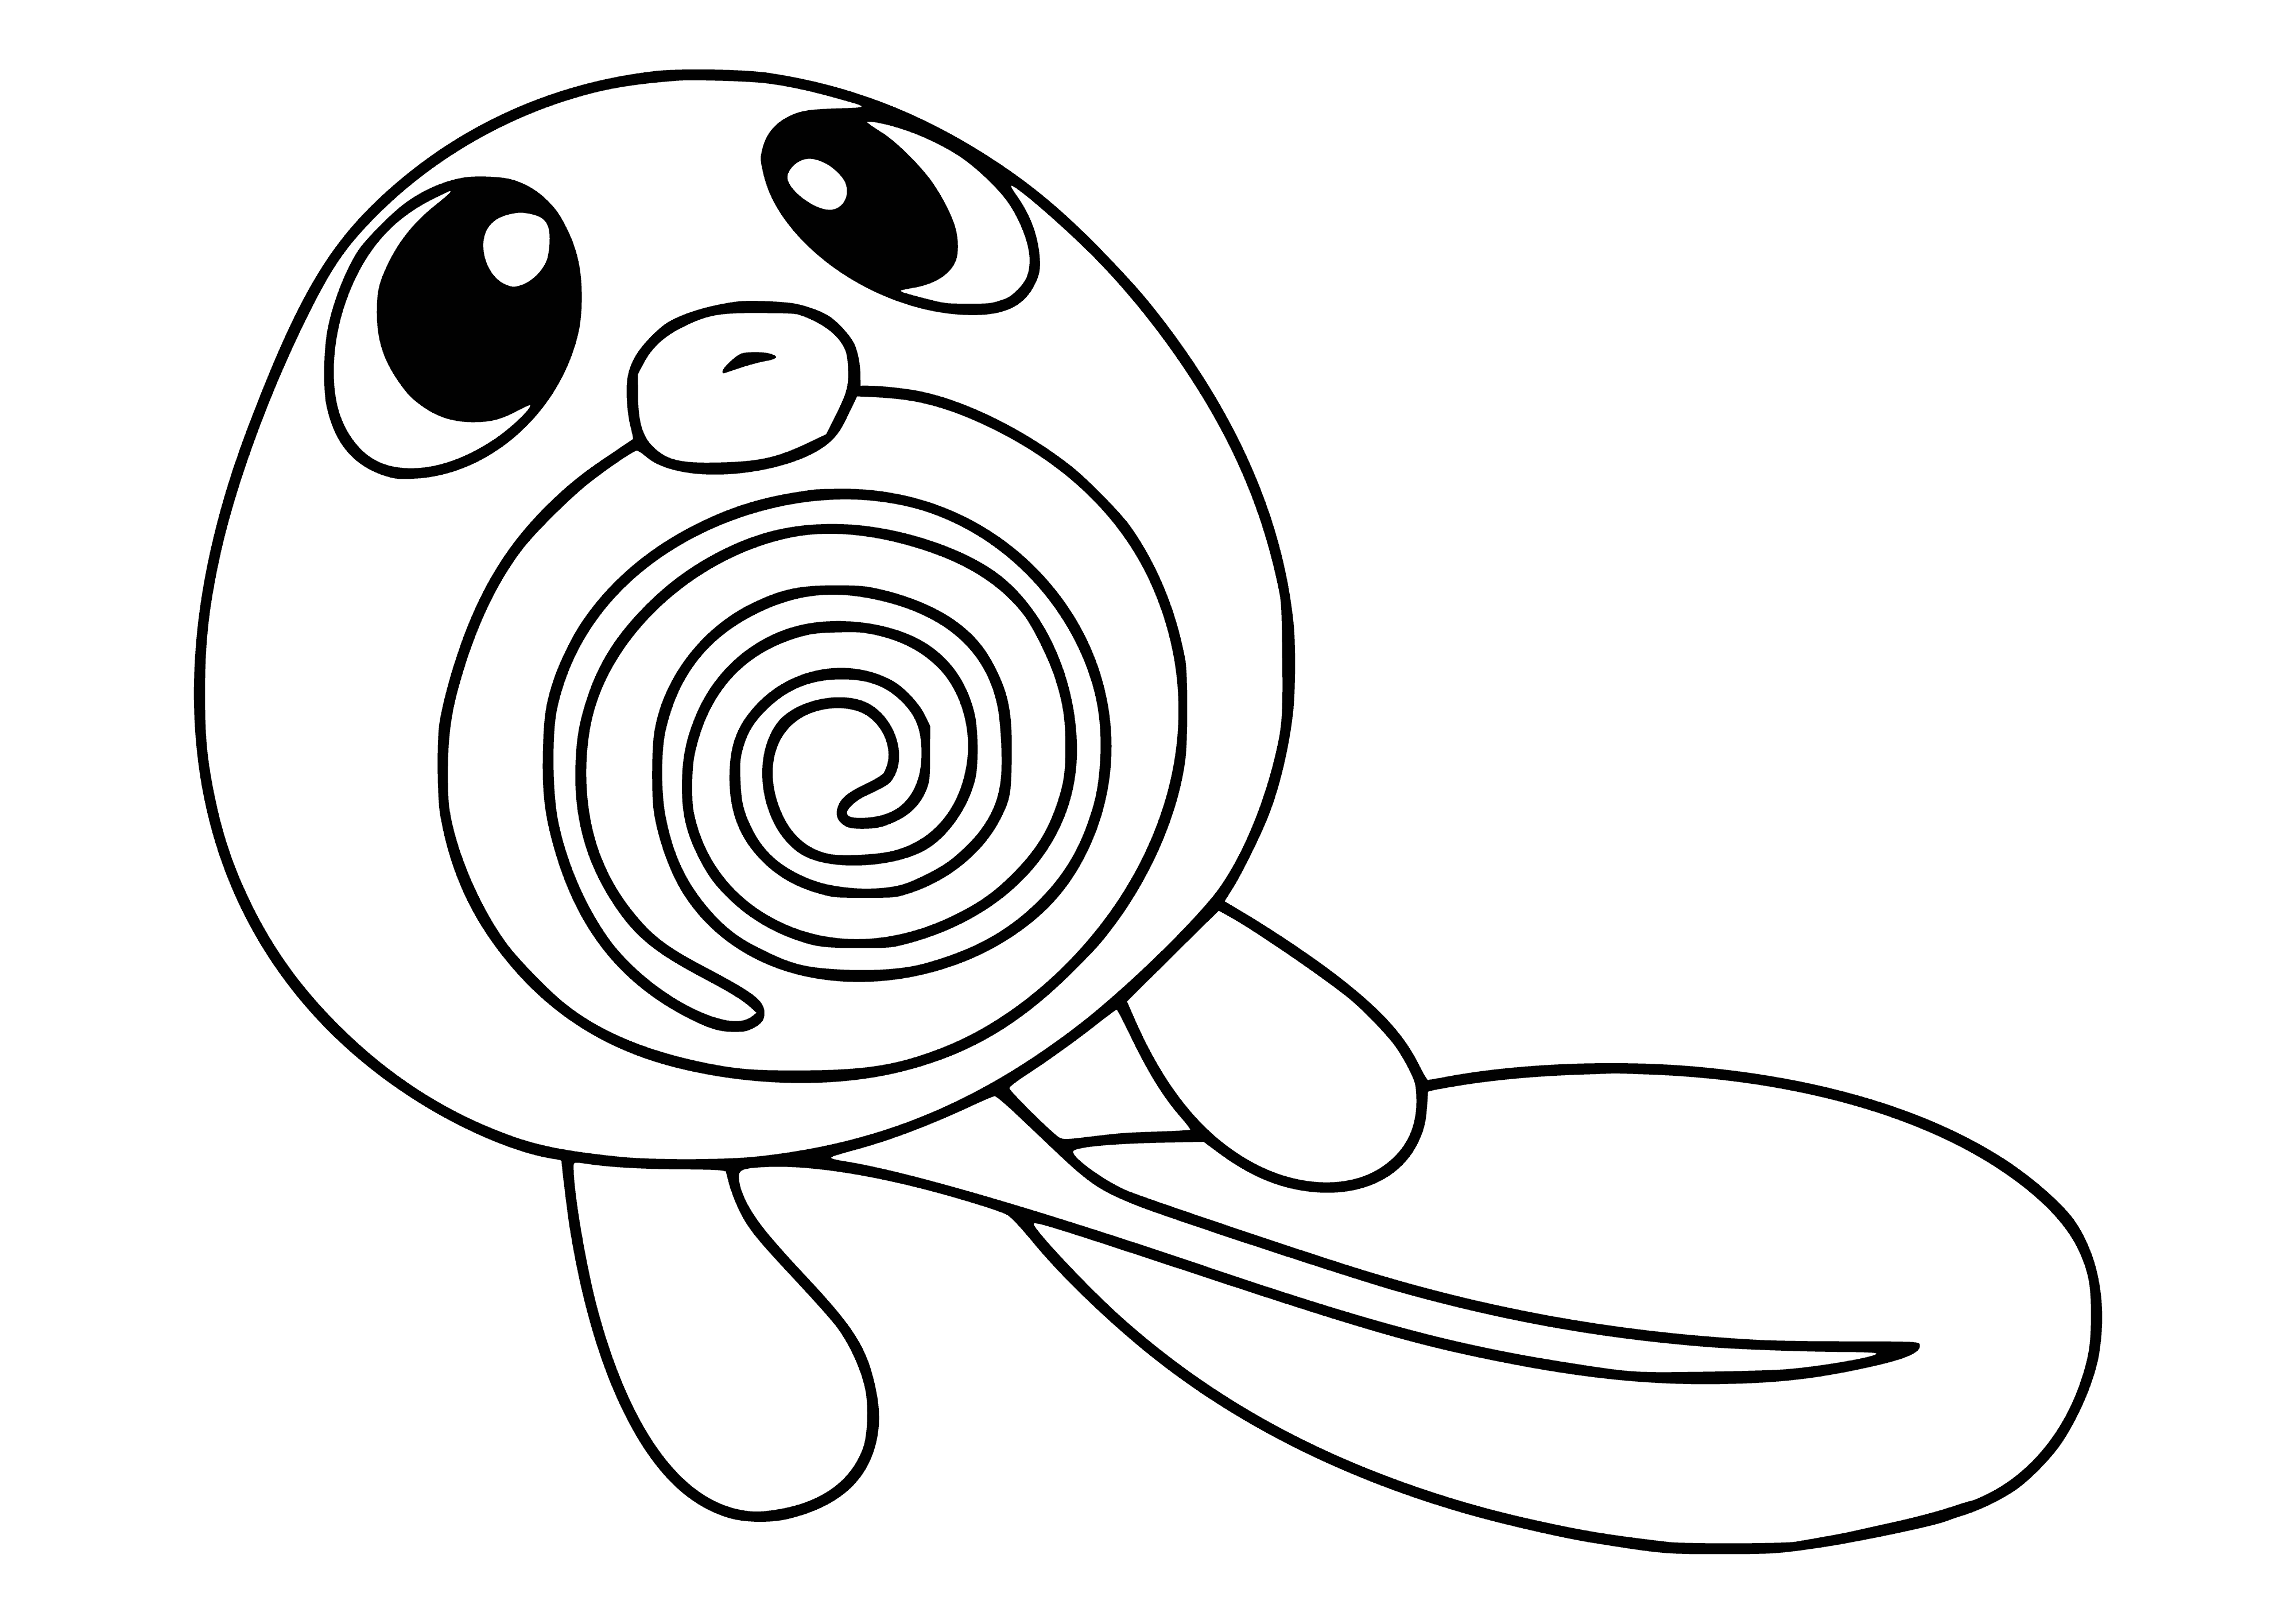 coloring page: Pokemon Poliwag evolves into Poliwhirl! It's a small, blue, tadpole-like Pokemon with a white belly, a black spiral, and large, black, pupil-less eyes. Three-toed feet help it navigate its way!